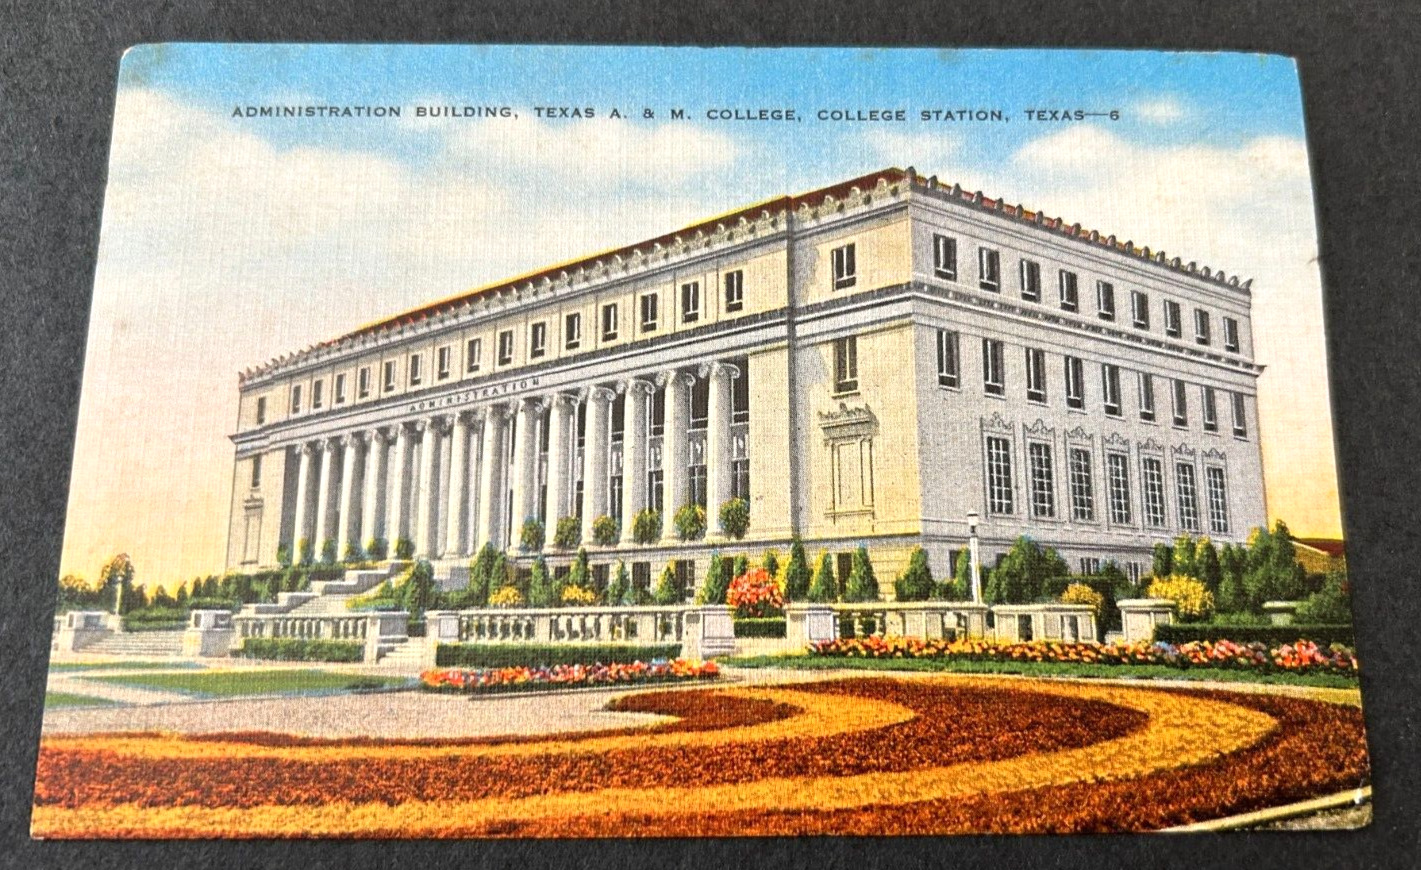 VINTAGE TEXAS A&M COLLEGE ADMINISTRATION BUILDING POSTCARD UNPOSTED